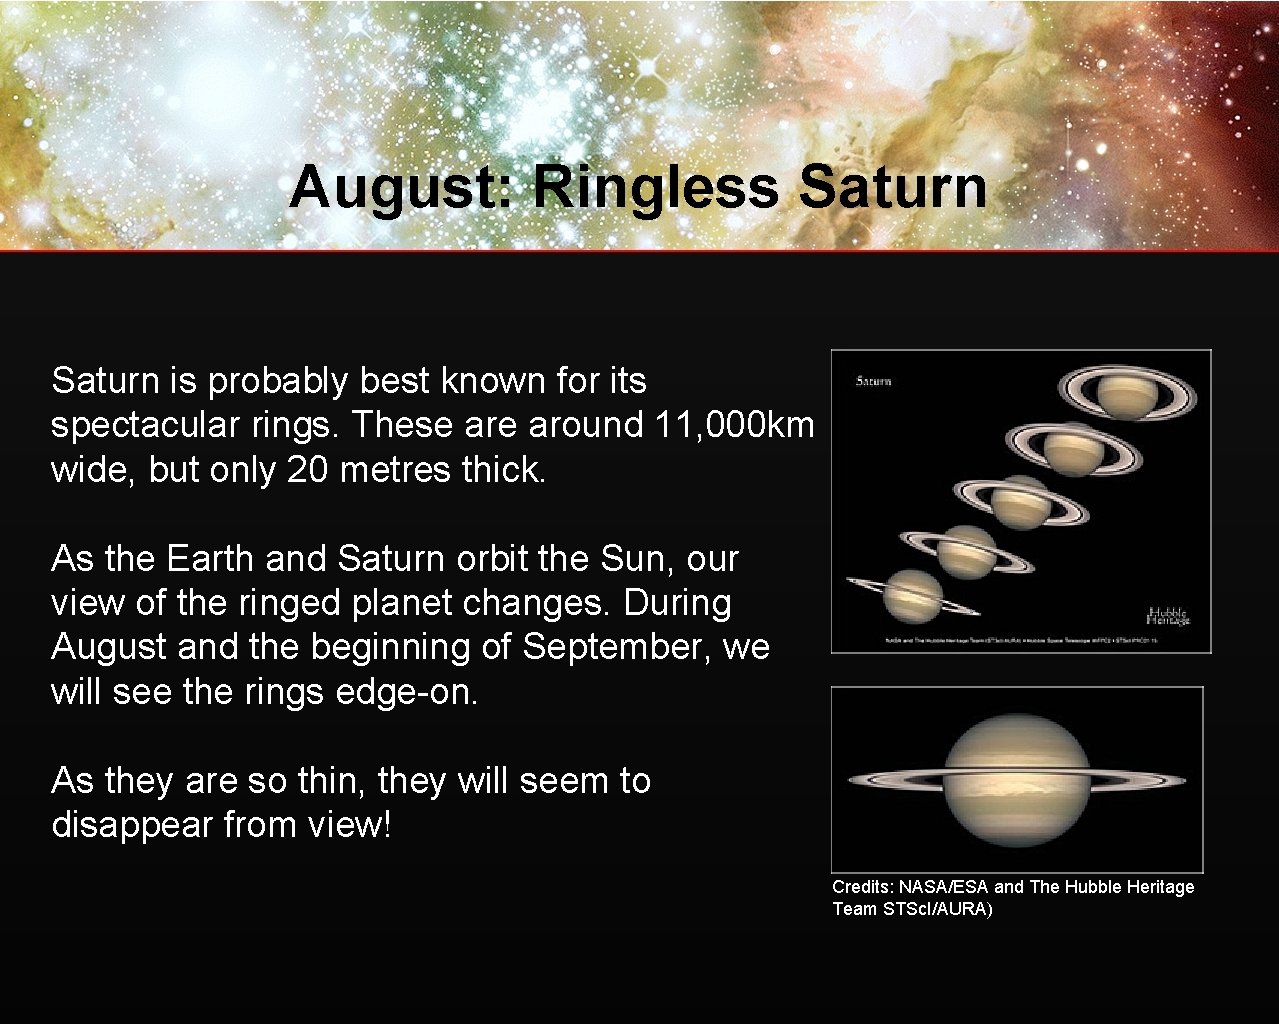 August: Ringless Saturn is probably best known for its spectacular rings. These around 11,